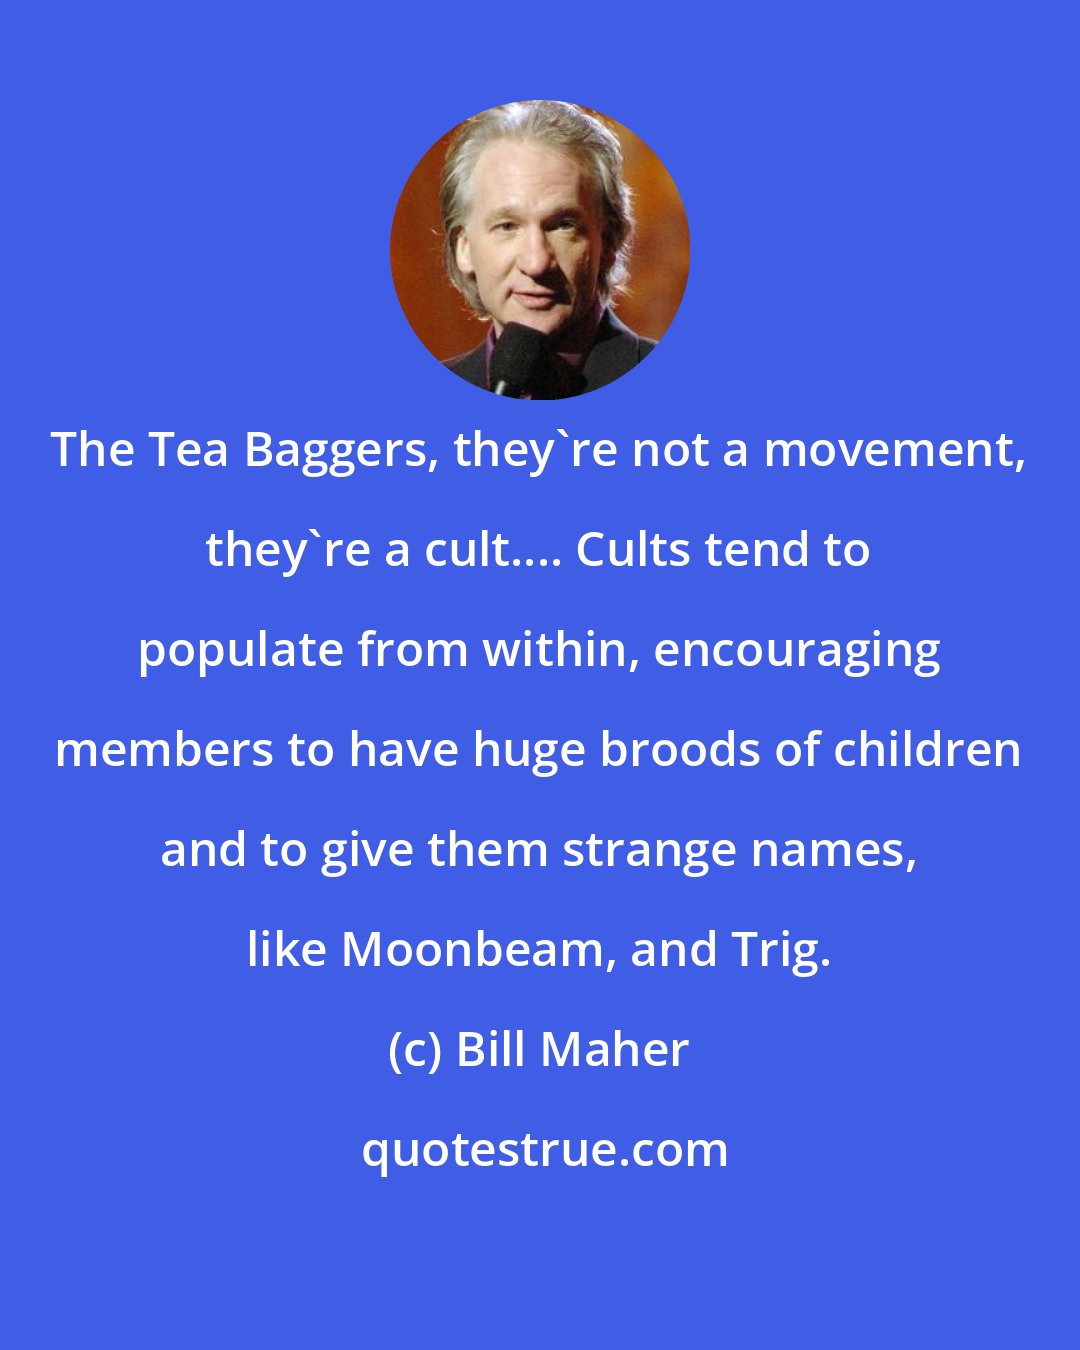 Bill Maher: The Tea Baggers, they're not a movement, they're a cult.... Cults tend to populate from within, encouraging members to have huge broods of children and to give them strange names, like Moonbeam, and Trig.